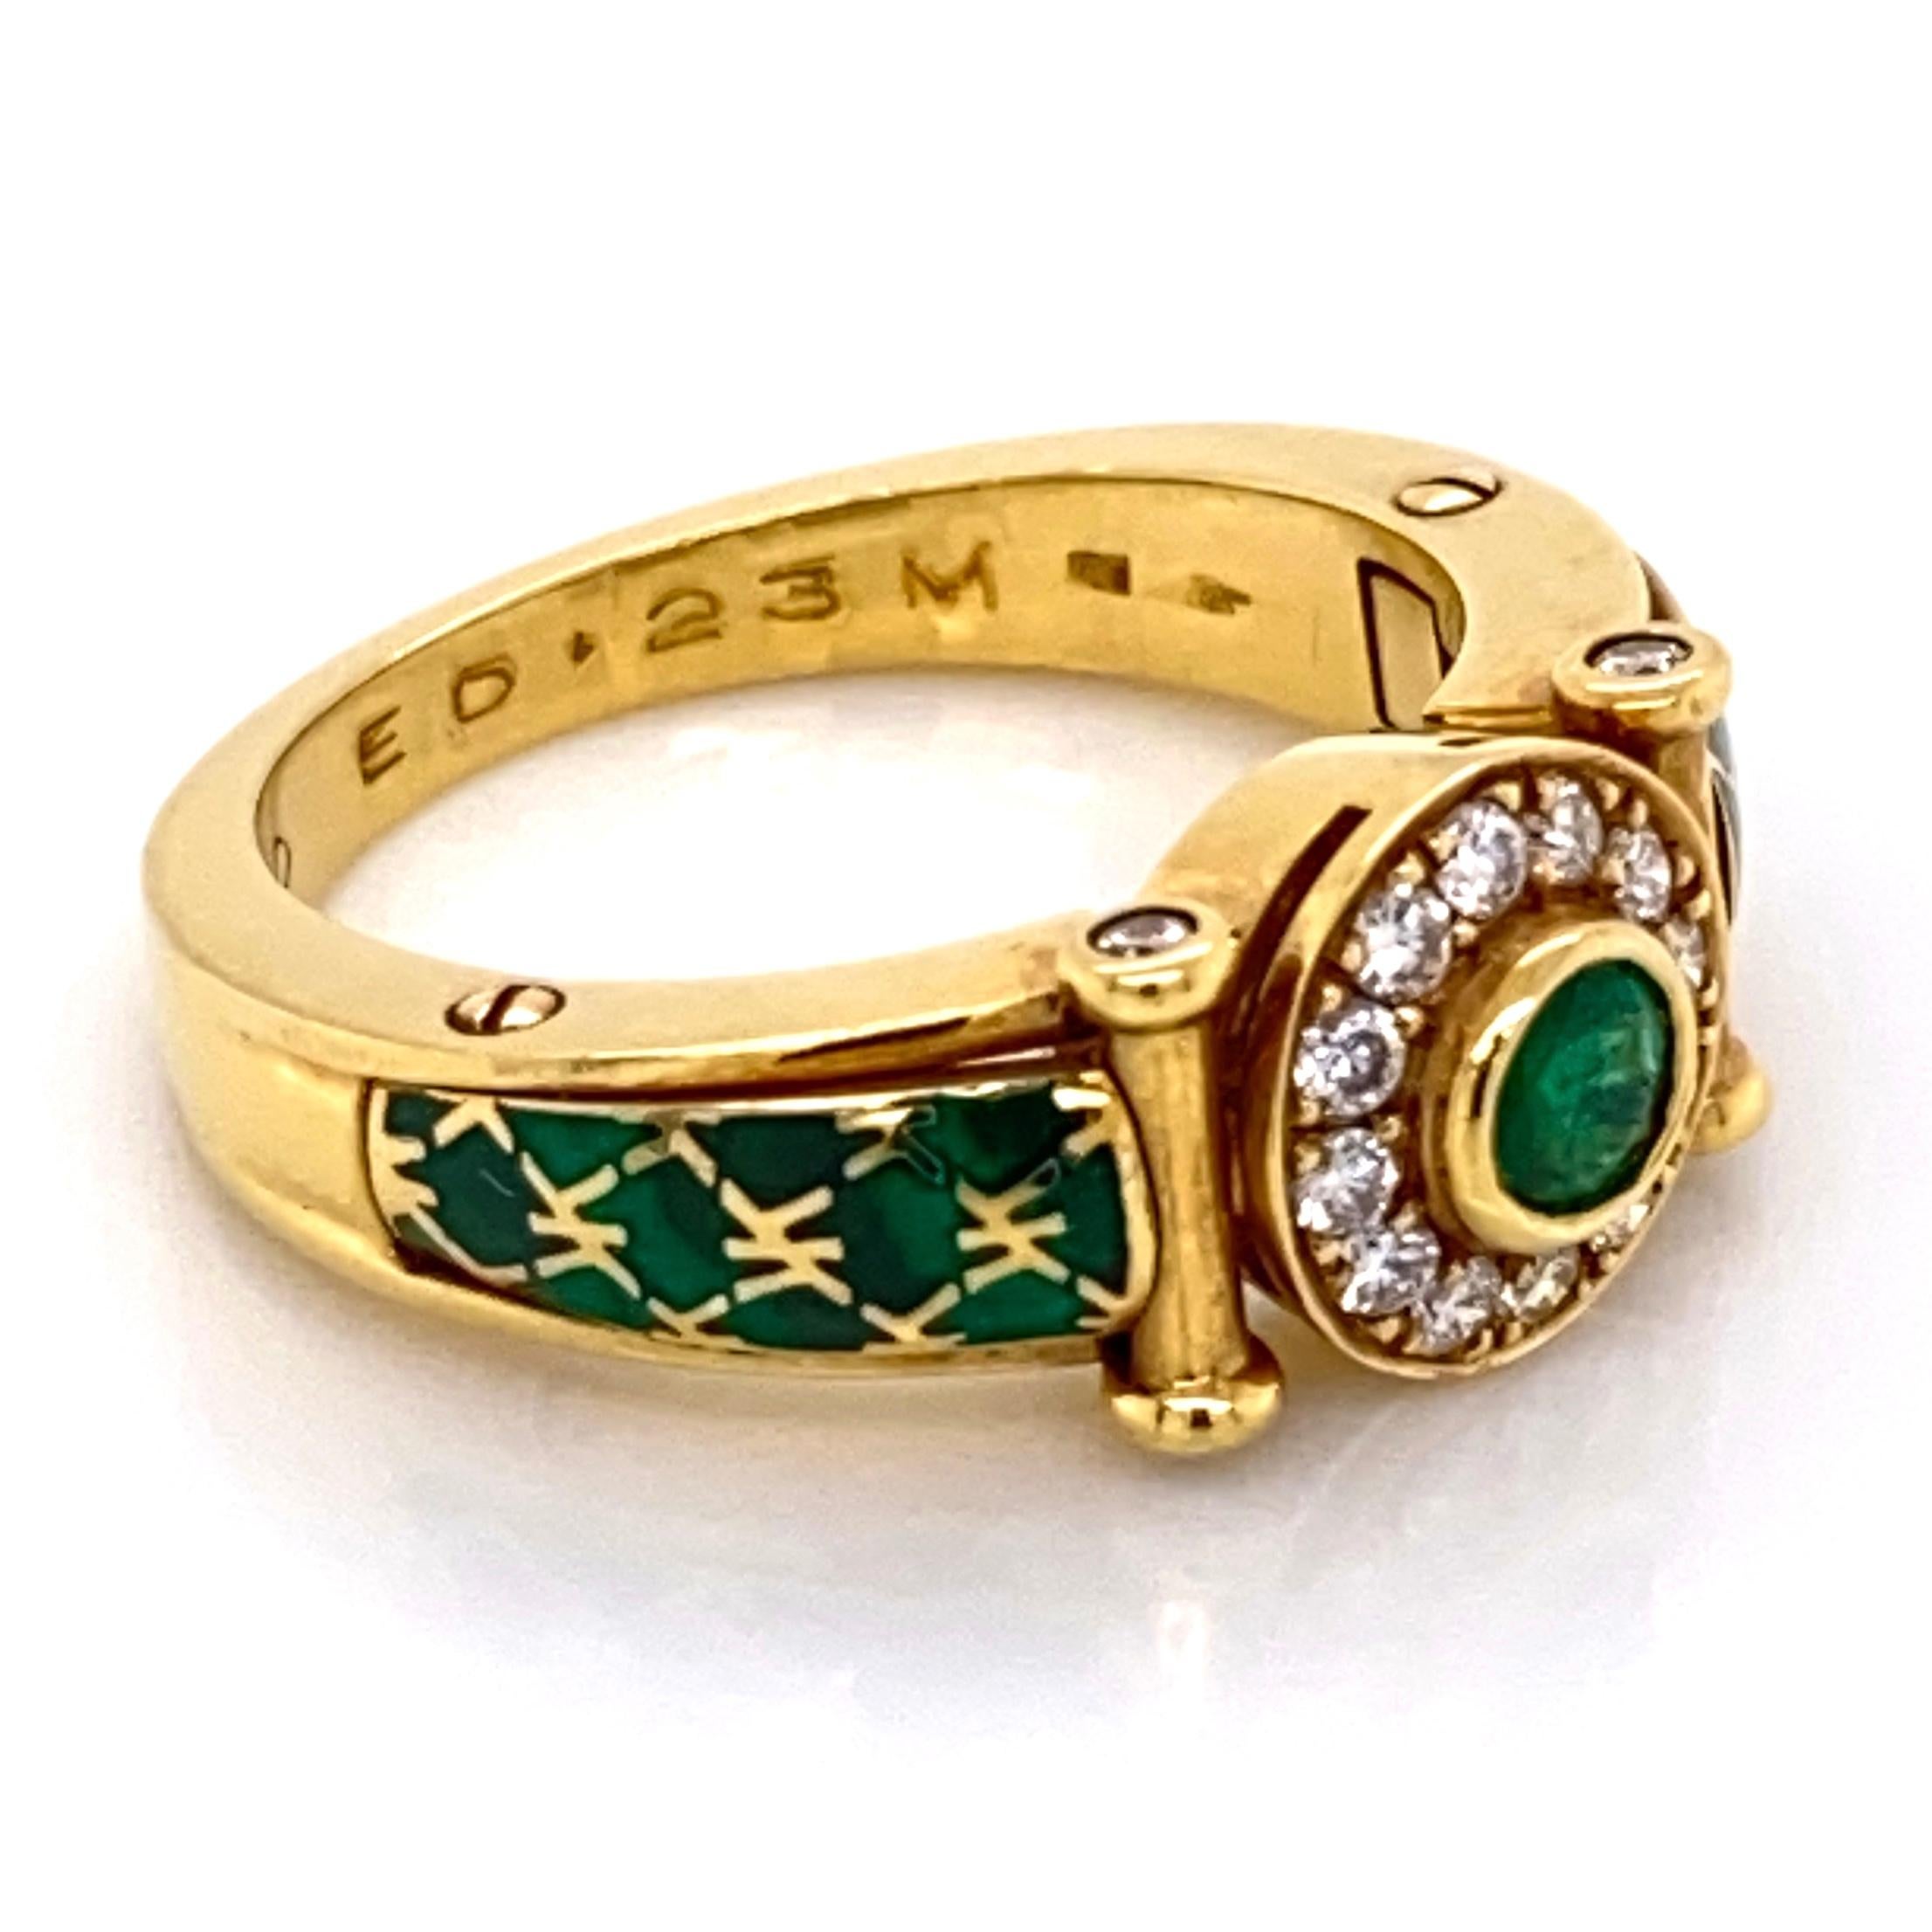 Round Cut Emerald and Diamond Green Enamel Gold Cocktail Ring Fine Estate Jewelry France